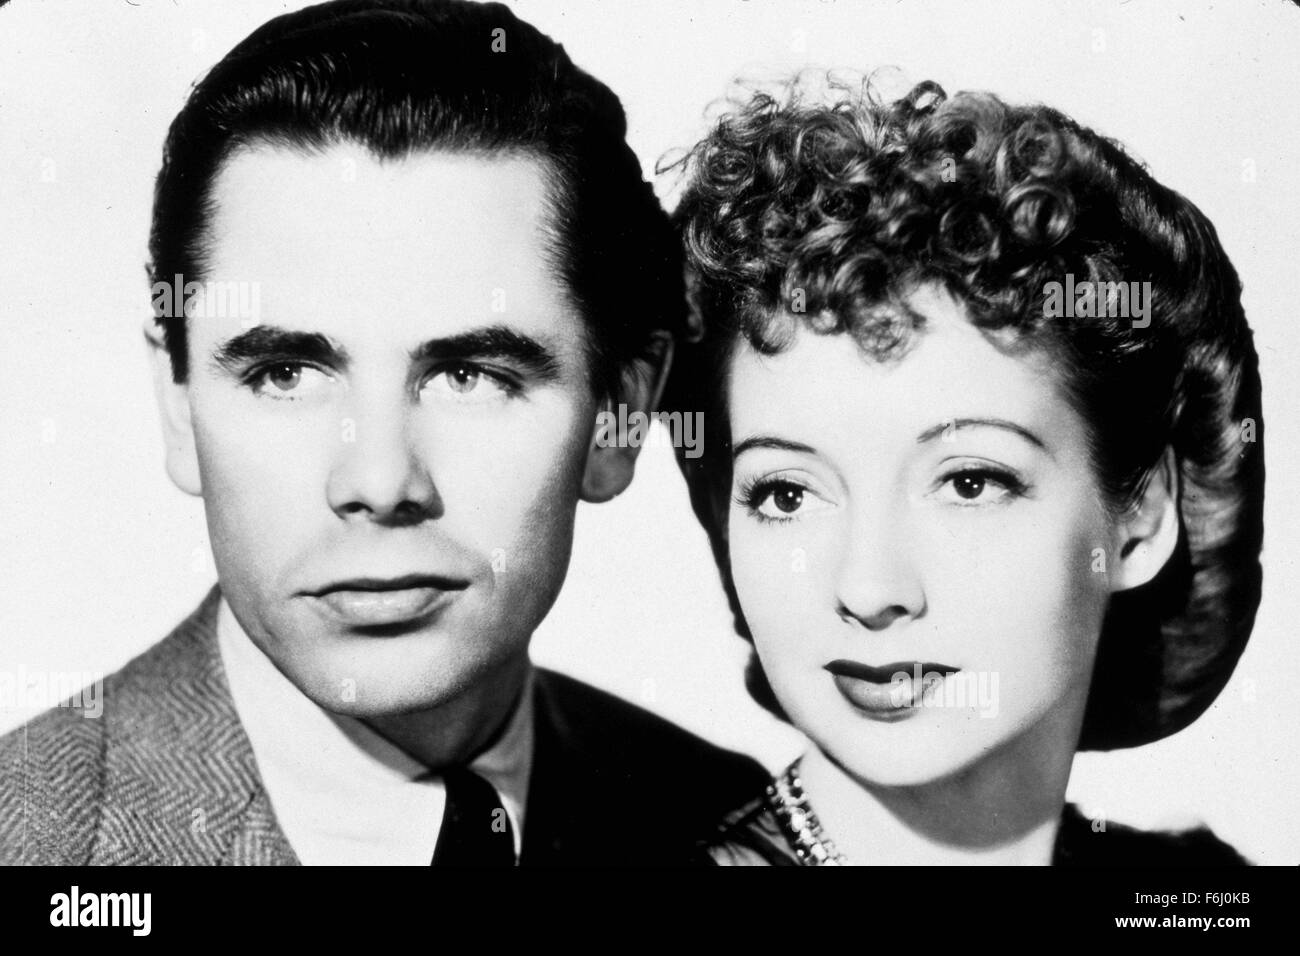 1942, Film Title: ADVENTURES OF MARTIN EDEN, Director: SIDNEY SALKOW, Studio: COLUMBIA, Pictured: GLENN FORD, EVELYN KEYES. (Credit Image: SNAP) Stock Photo